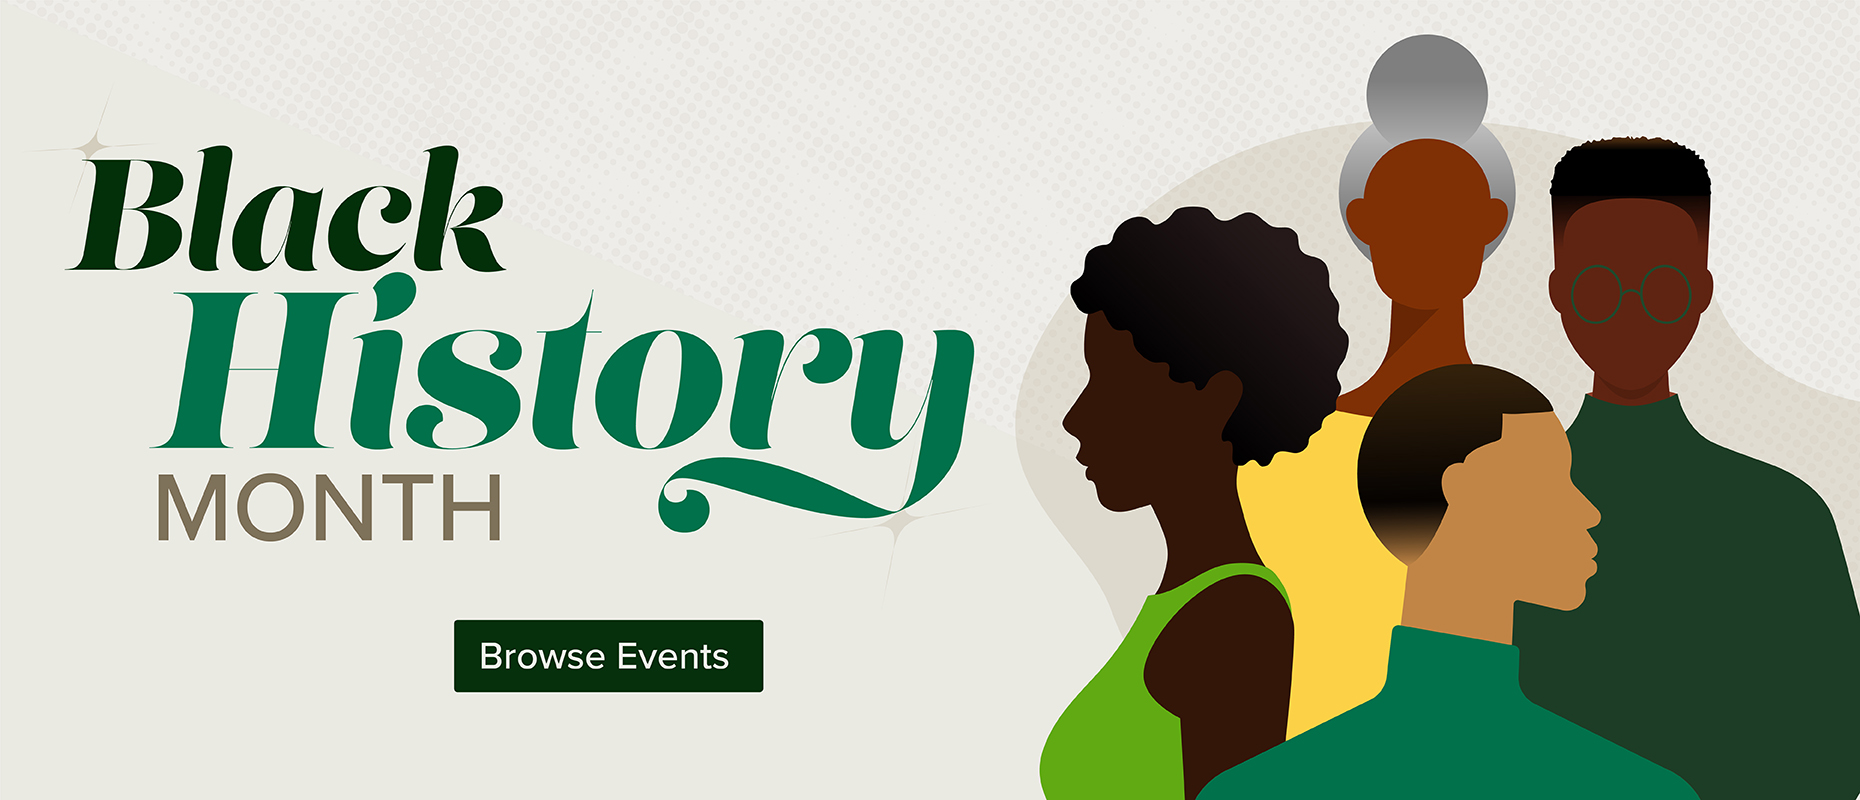 Black History Month: Browse events